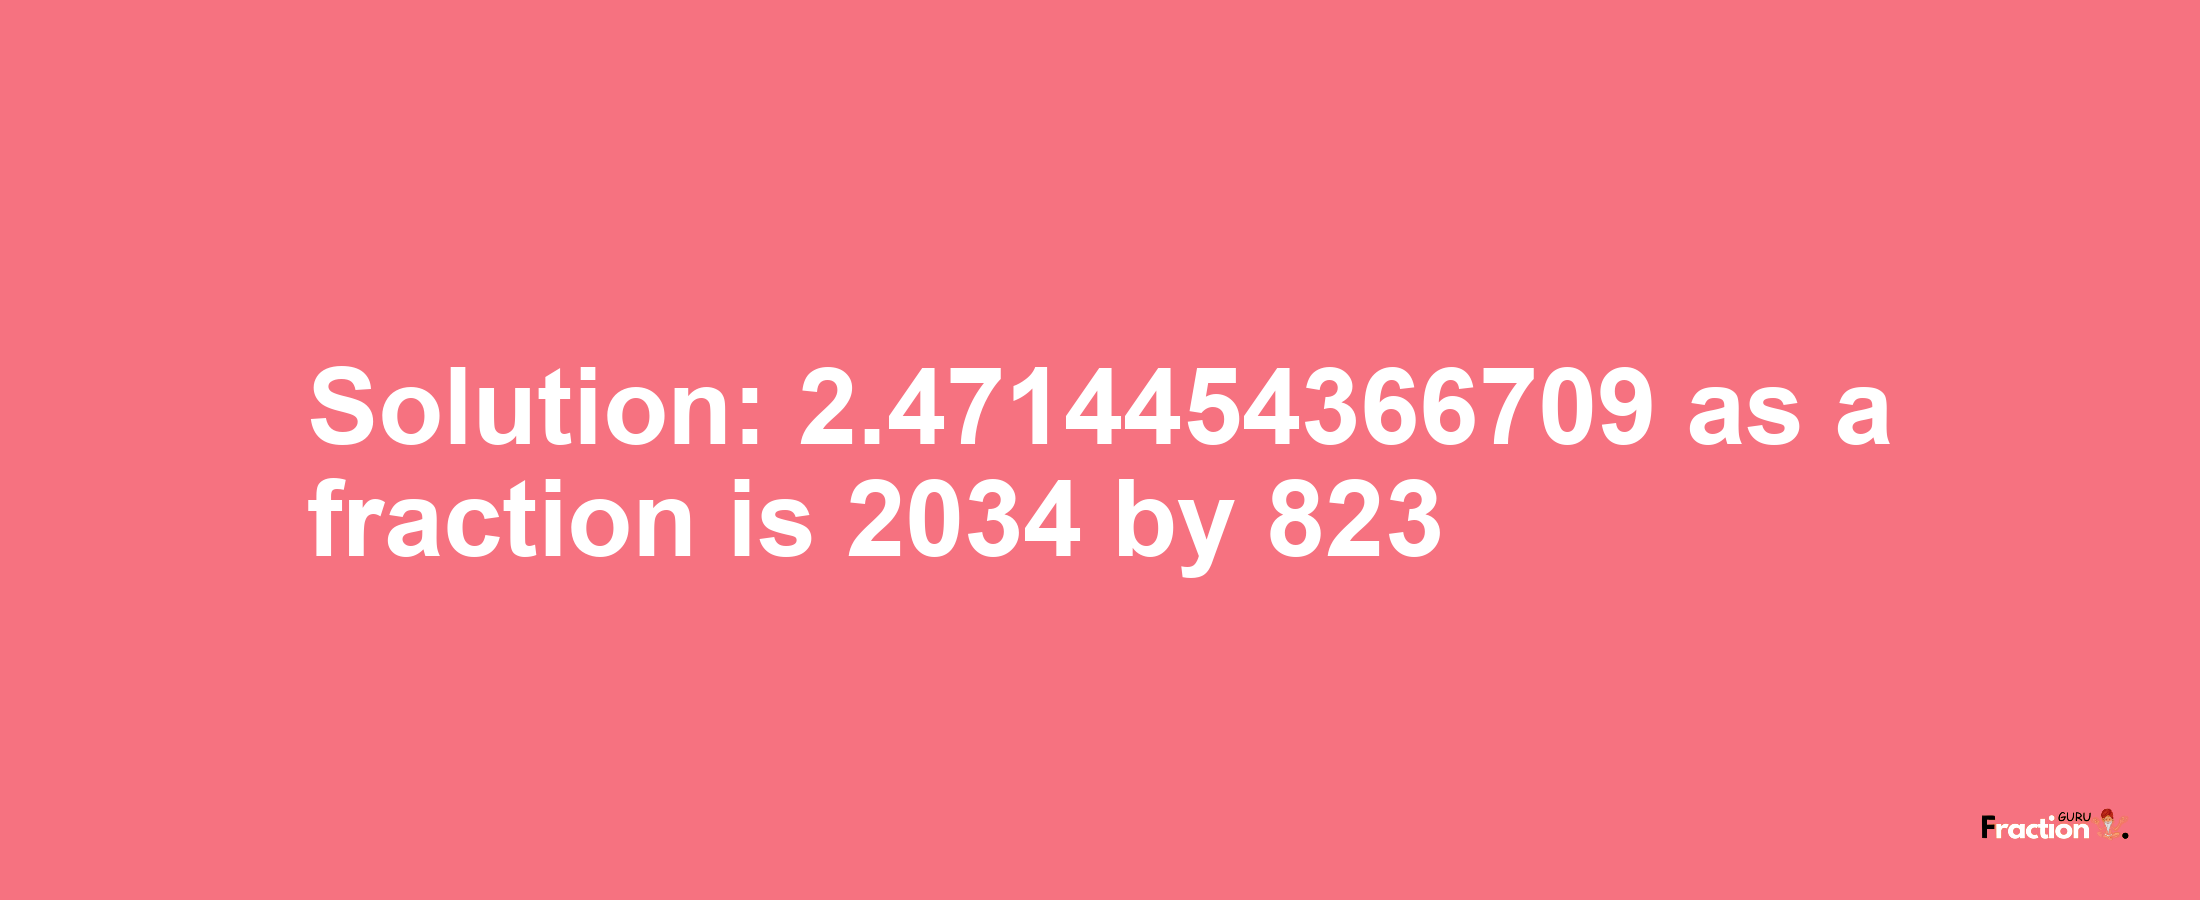 Solution:2.4714454366709 as a fraction is 2034/823